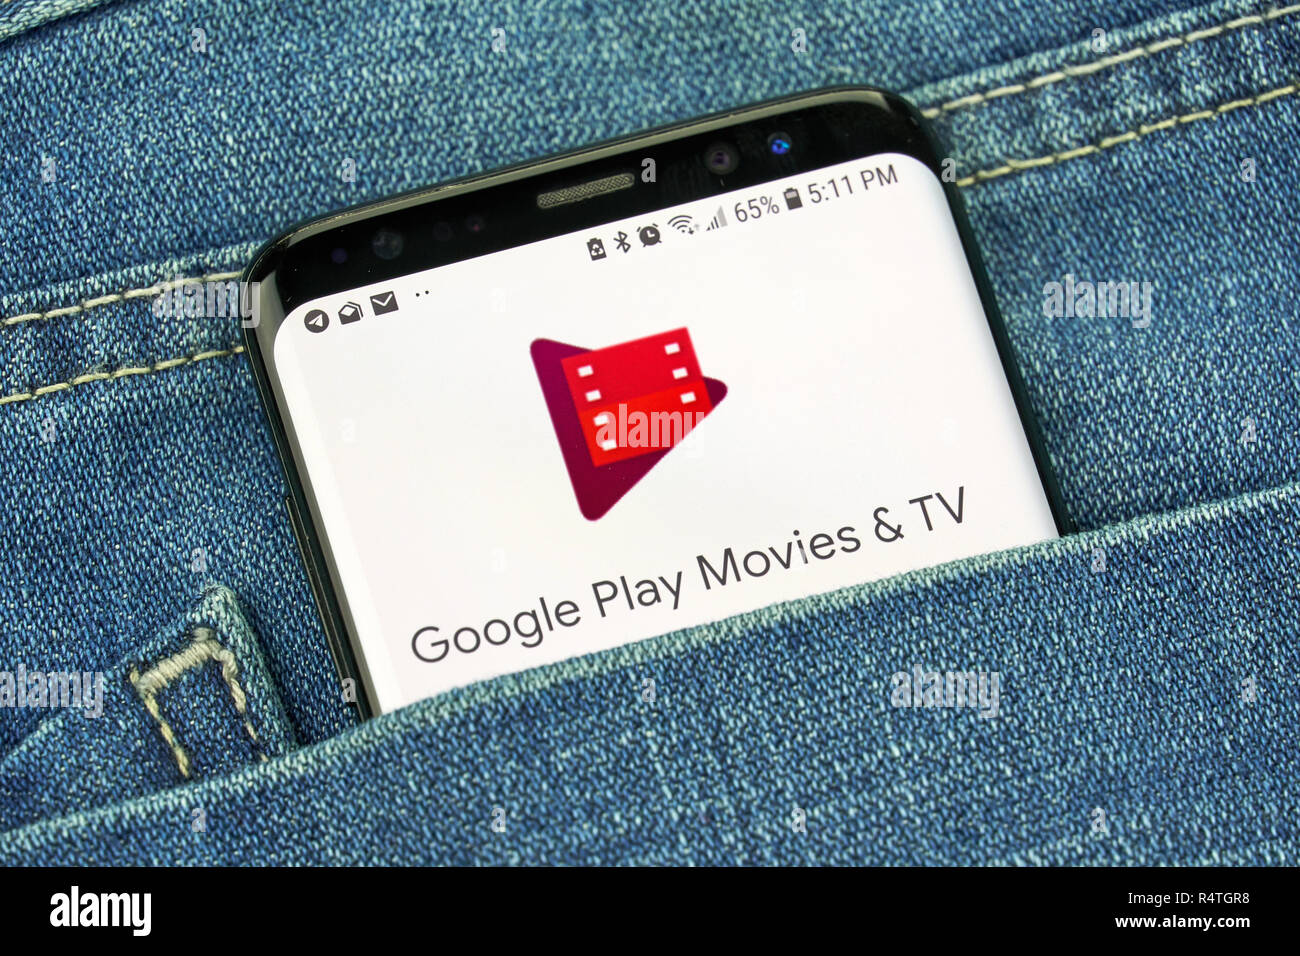 MONTREAL, CANADA - OCTOBER 4, 2018: Google Play Movies and TV on s8 screen. Google is an American technology company which provides a variety of inter Stock Photo